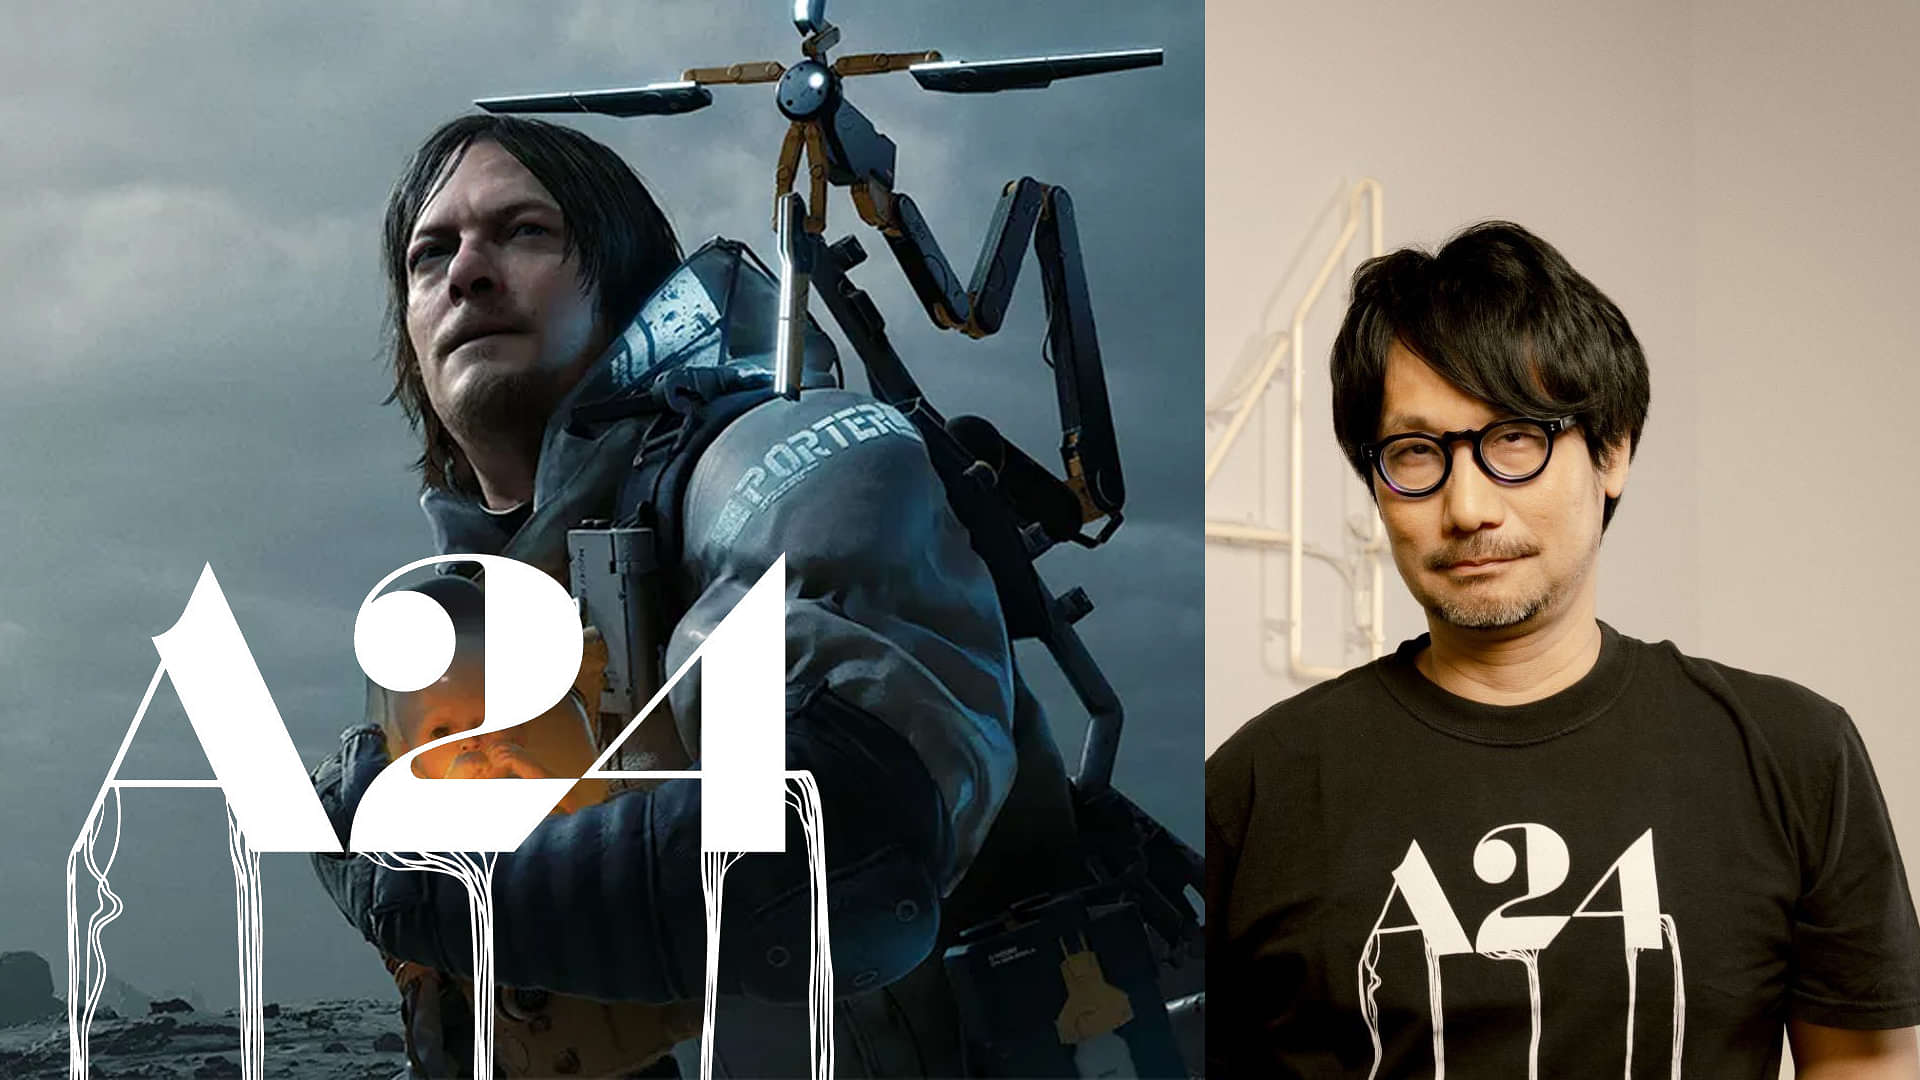 Death Stranding 2 or Kojima's new horror game might be revealed soon